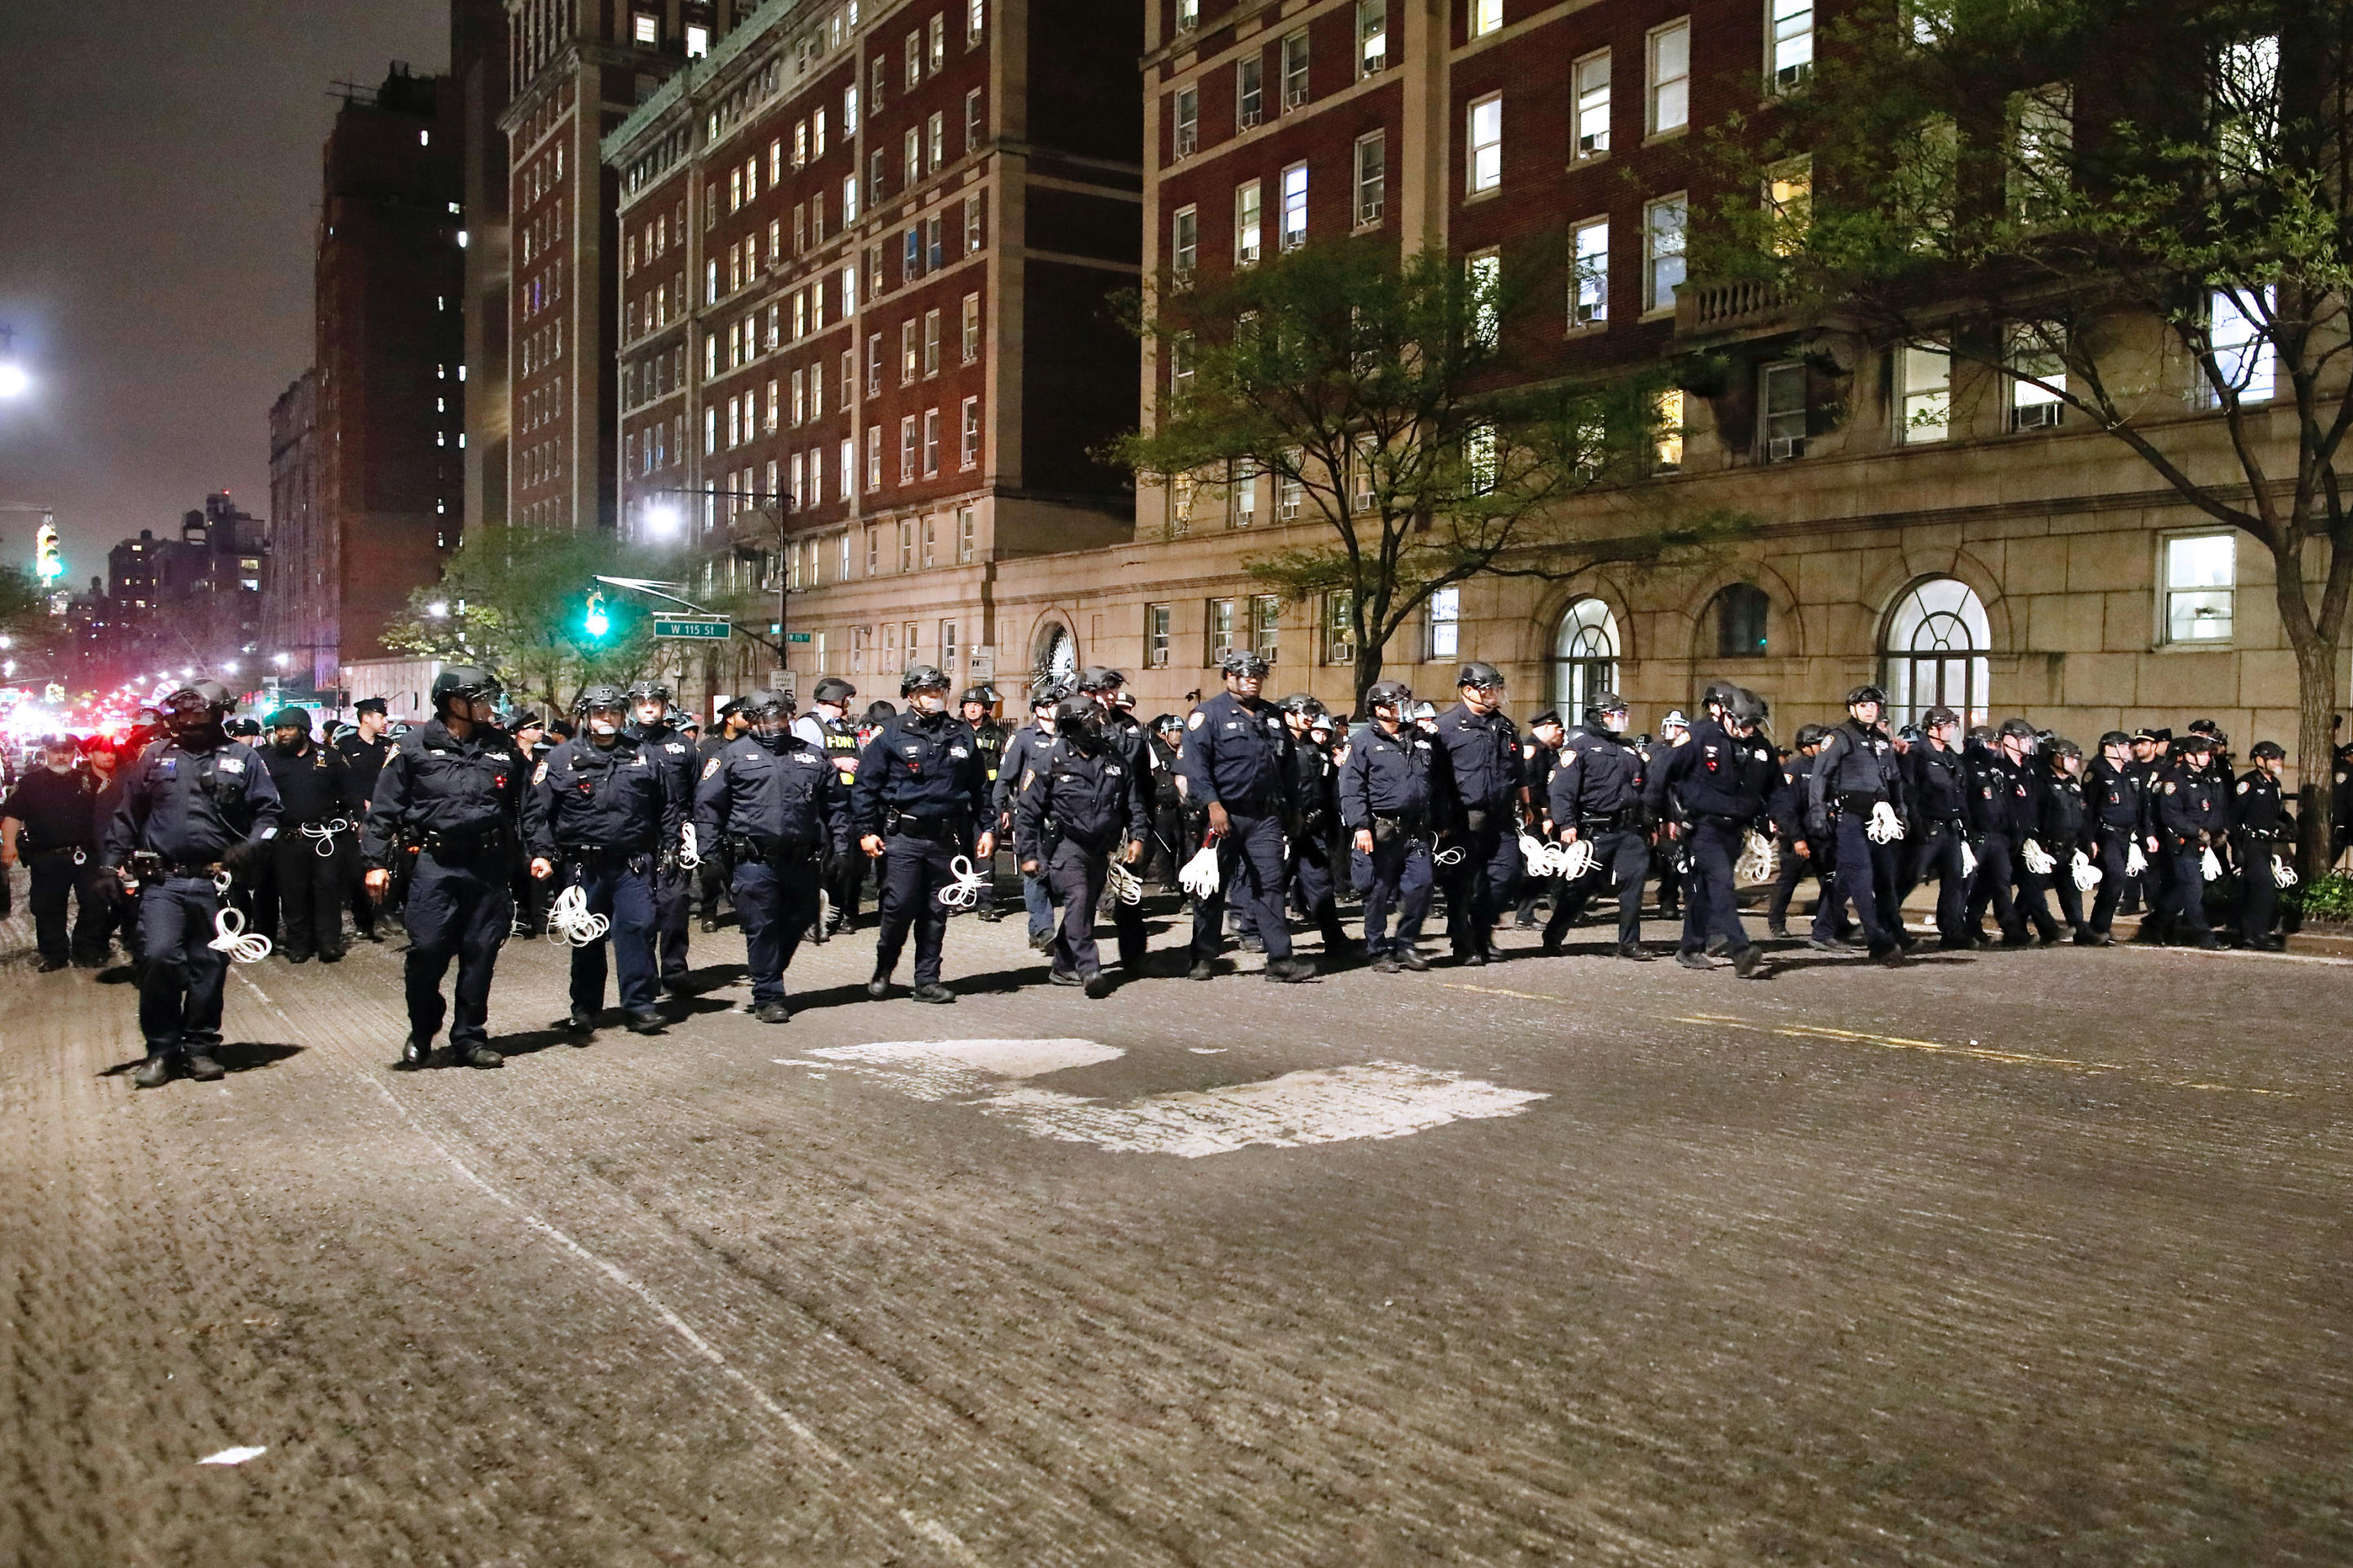 NYPD officers in riot gear walk onto the campus at Columbia University.